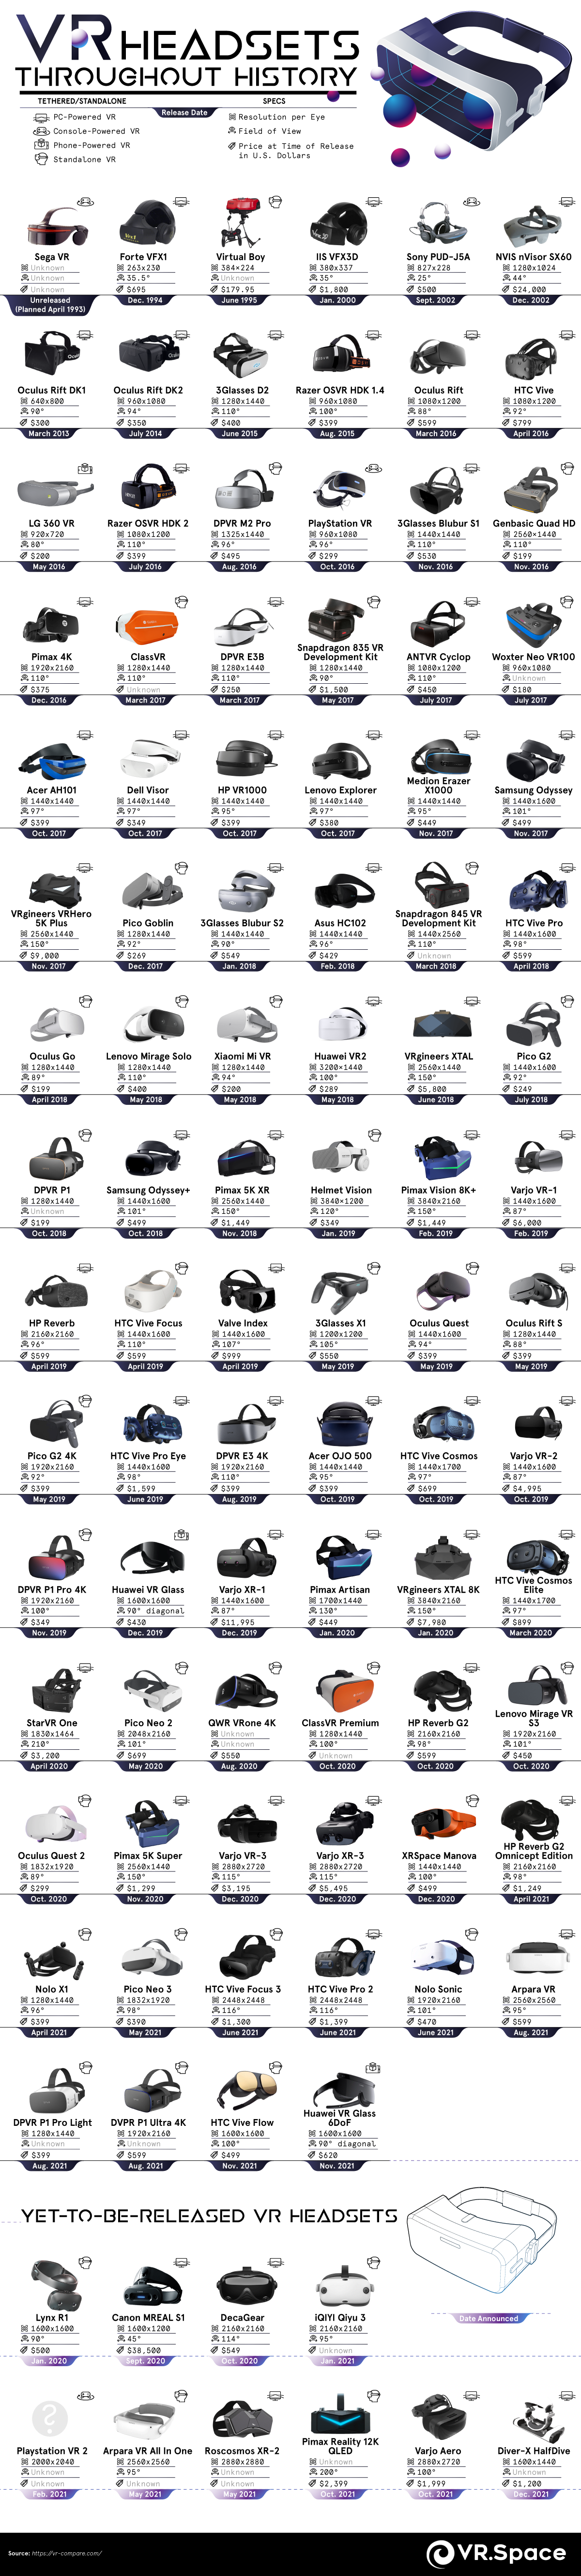 Which Popular VR Headsets Have Generated the Most Revenue? - VR Space Virtual Reality Worlds - Infographic